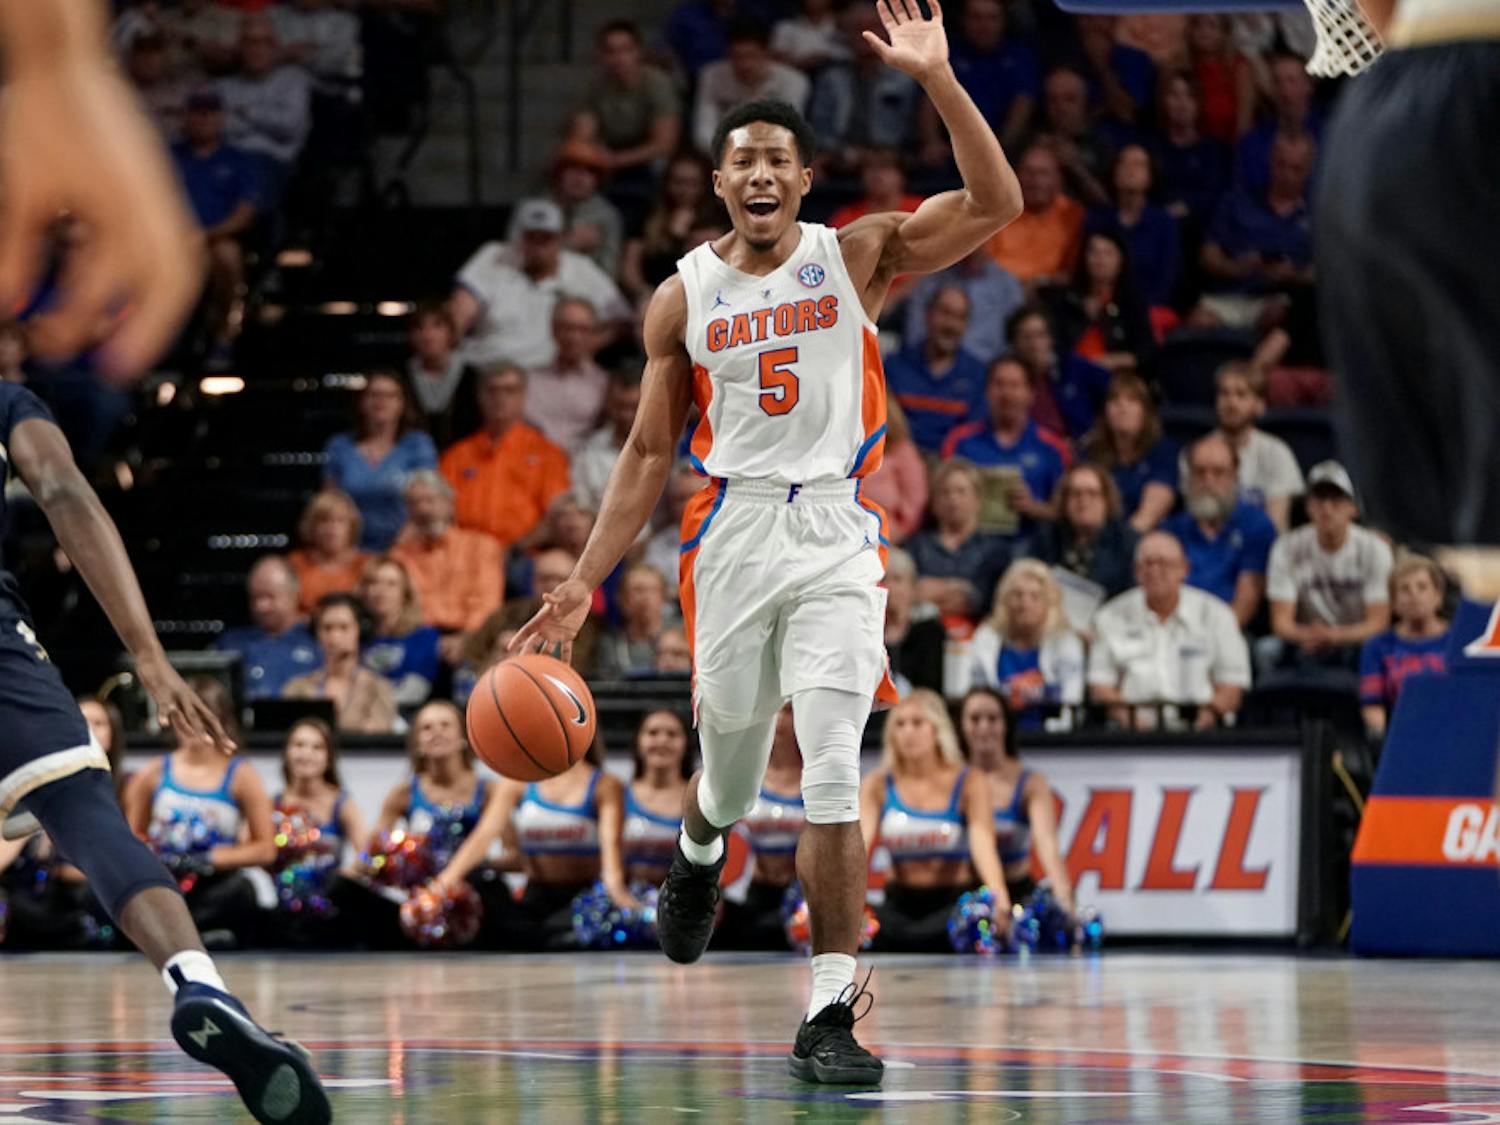 Senior guard KeVaughn Allen went 6-of-11 from the field for 14 points on Friday against Charleston Southern. He went 0-for-4 in the season-opener against FSU.